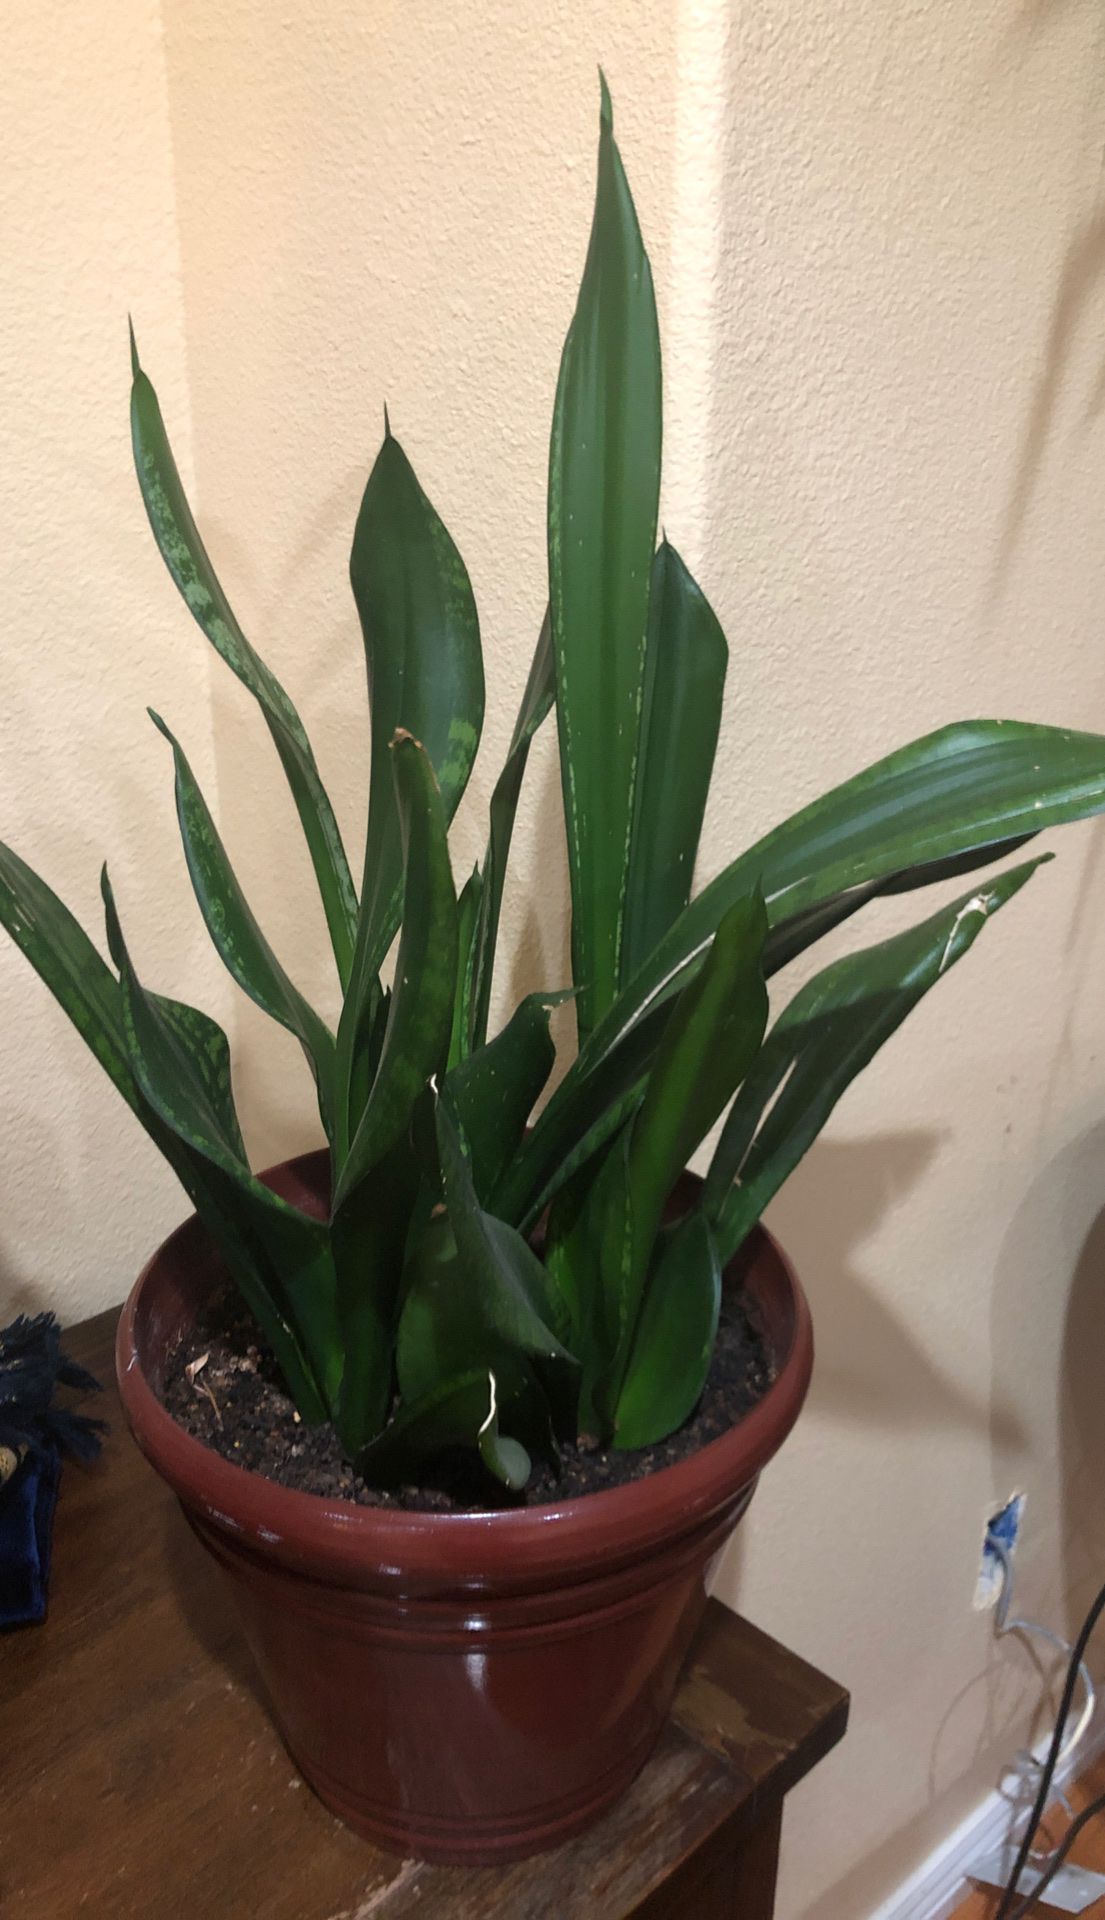 Snake or mother-in-law tongue house plant in the nice durable new pot